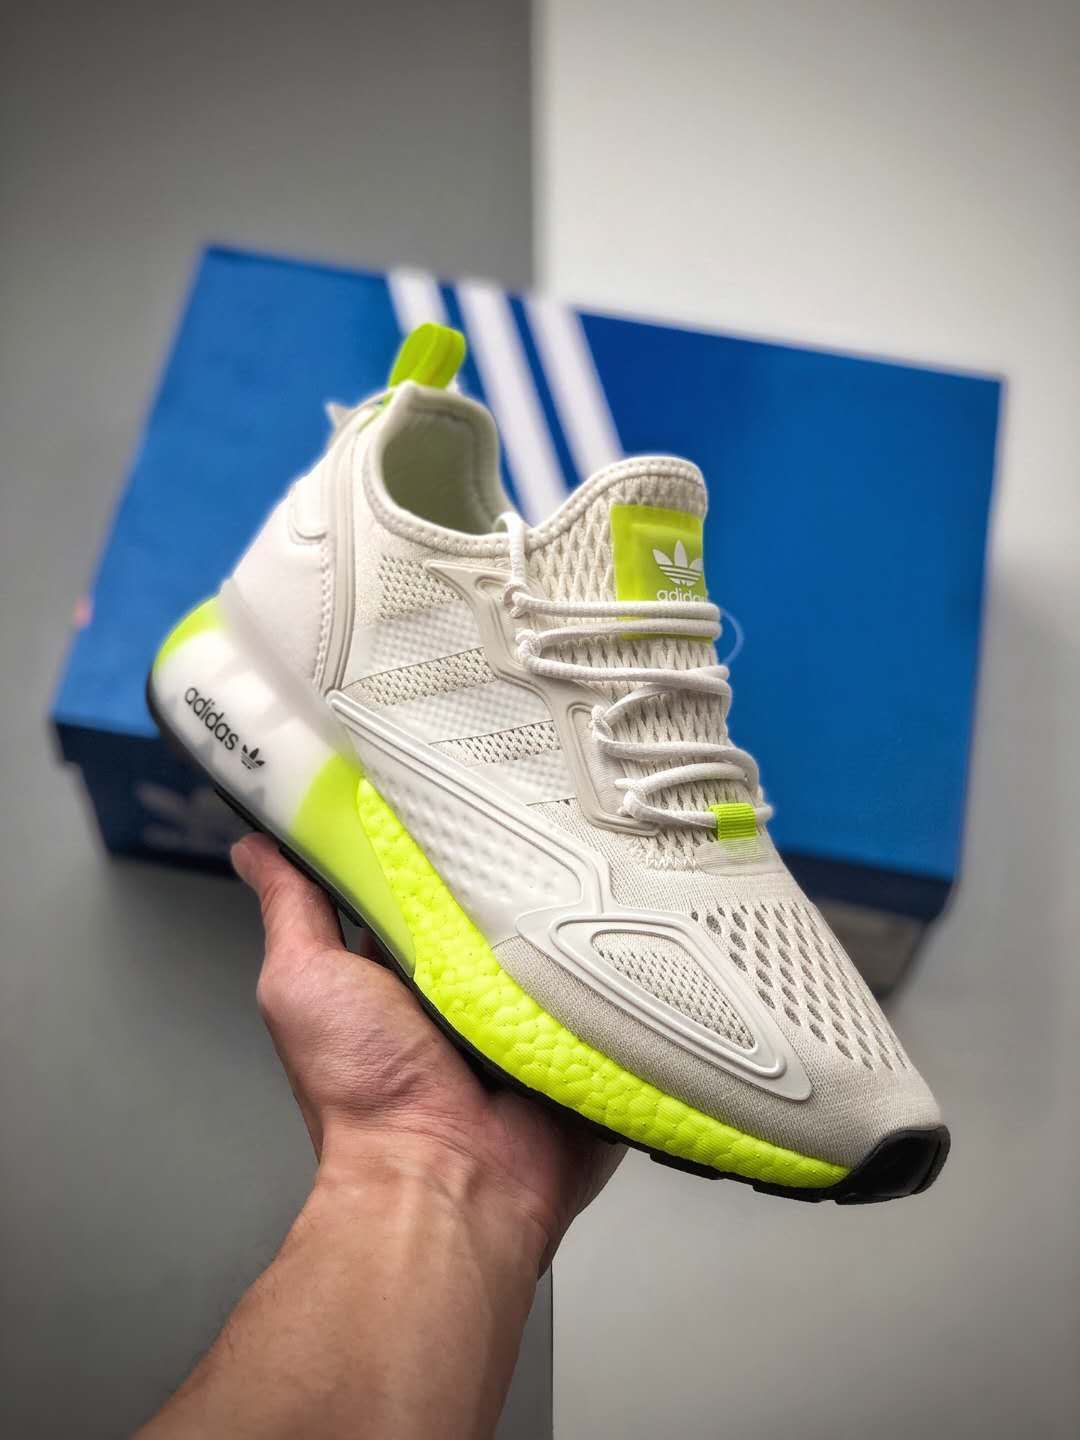 Adidas ZX 2K Boost White Solar Yellow - Stylish Comfort at Its Best